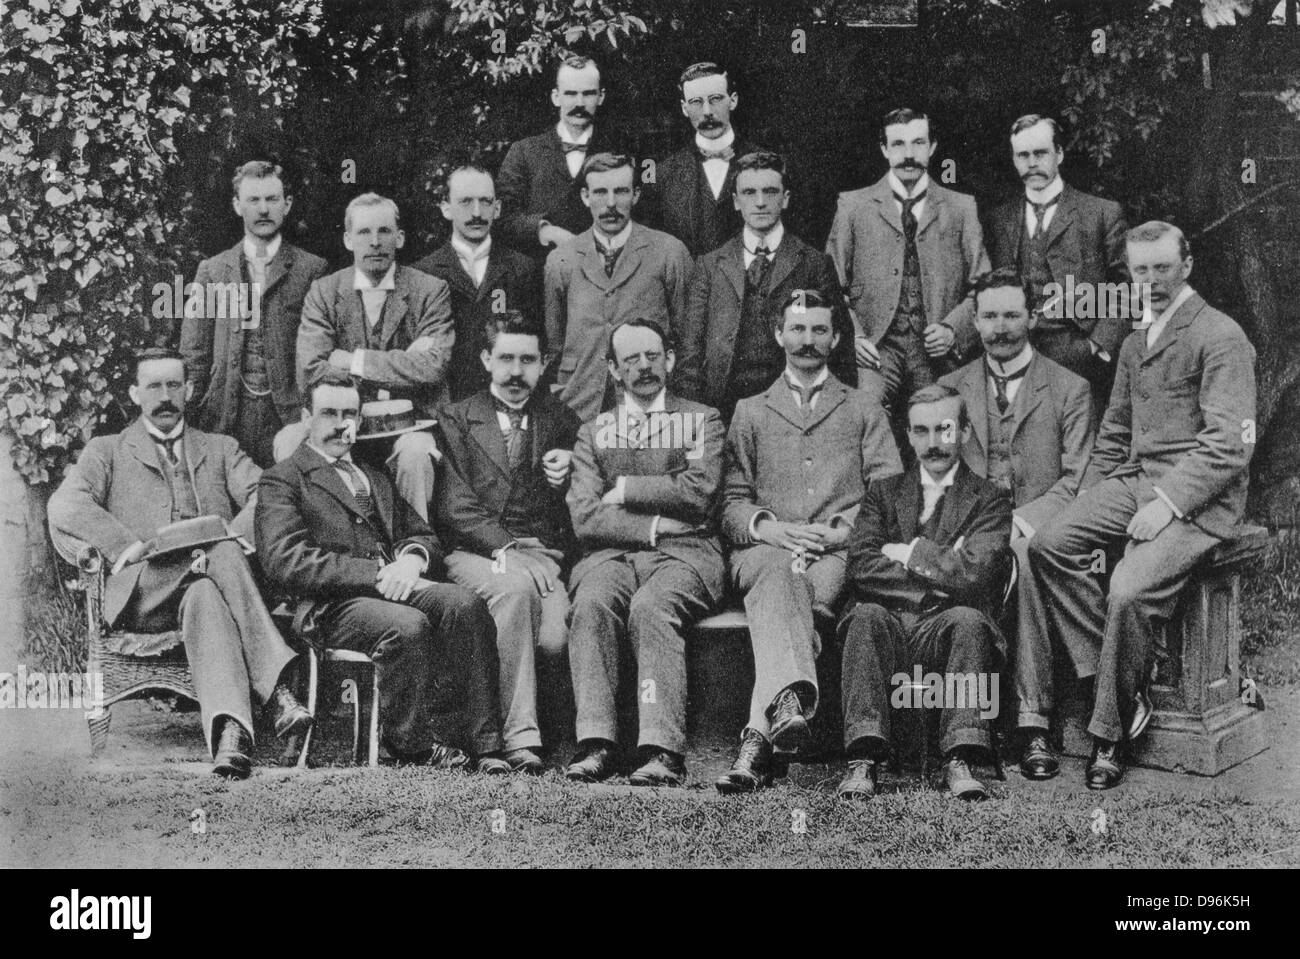 JJ (Joseph John) Thomson (1856-1940) British Nuclear physicist, discovered electron, here with his research students at the Cavendish Laboratory, Cambridge, in 1898. Left to right, back: SW Richardson, J Henry. Middle: EBH Wade, GA Shakespear, CTR Wilson, Ernest Rutherford, W Craig-Henderson, JH Vincent, GB Bryan. Front: J McClelland, C Child, Paul Langevin, JJ Thomson, J Zeleny, RS Willows, HA Wilson, JSE Townsend. Stock Photo